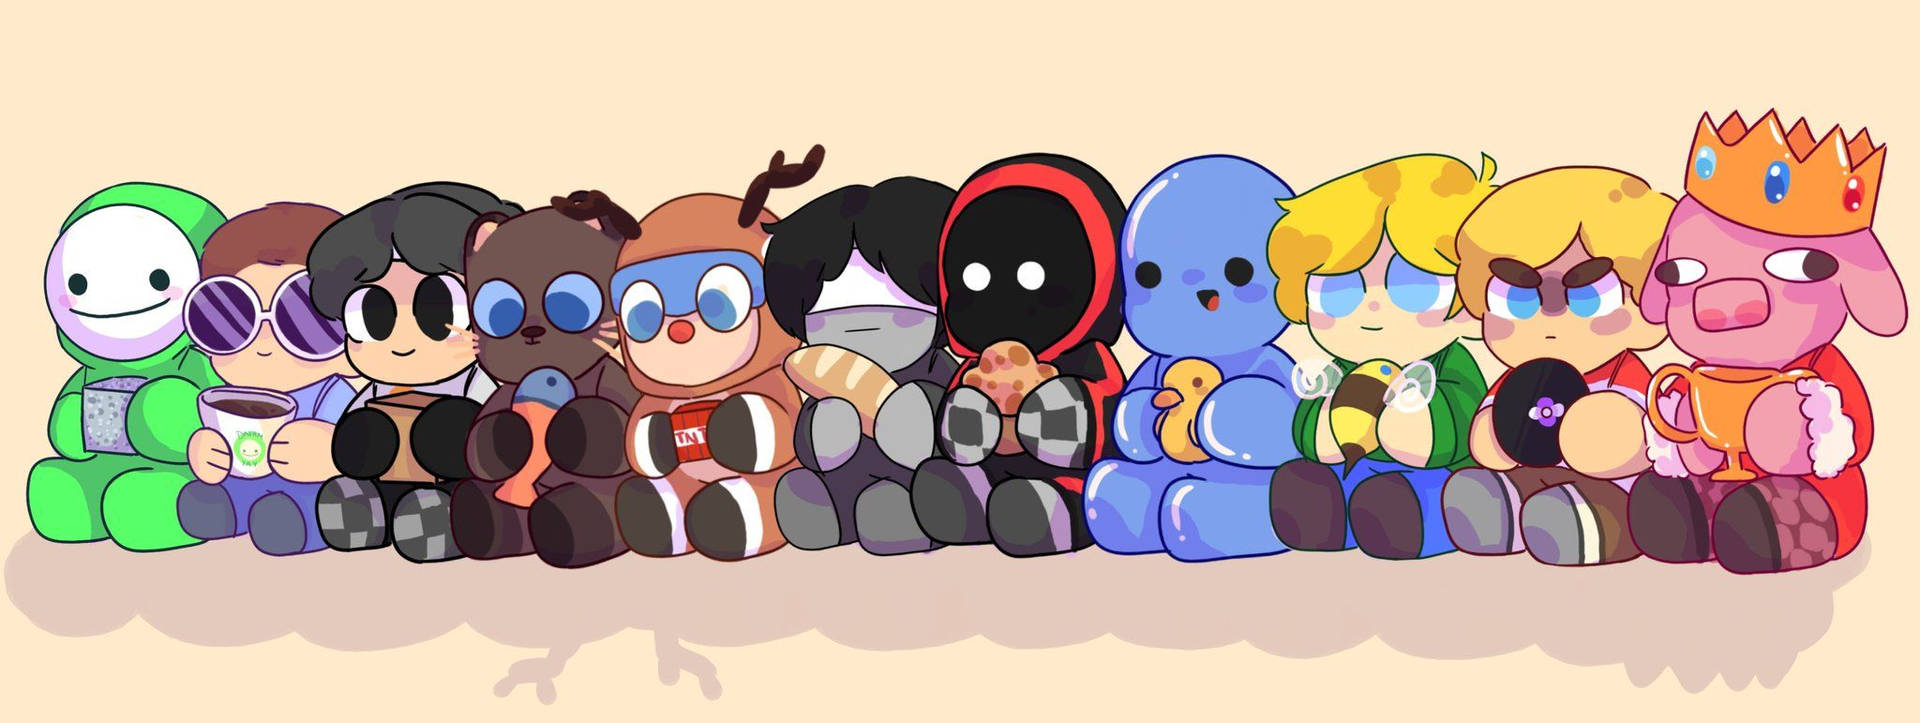 Adorable MCYT Sitting Characters Wallpaper